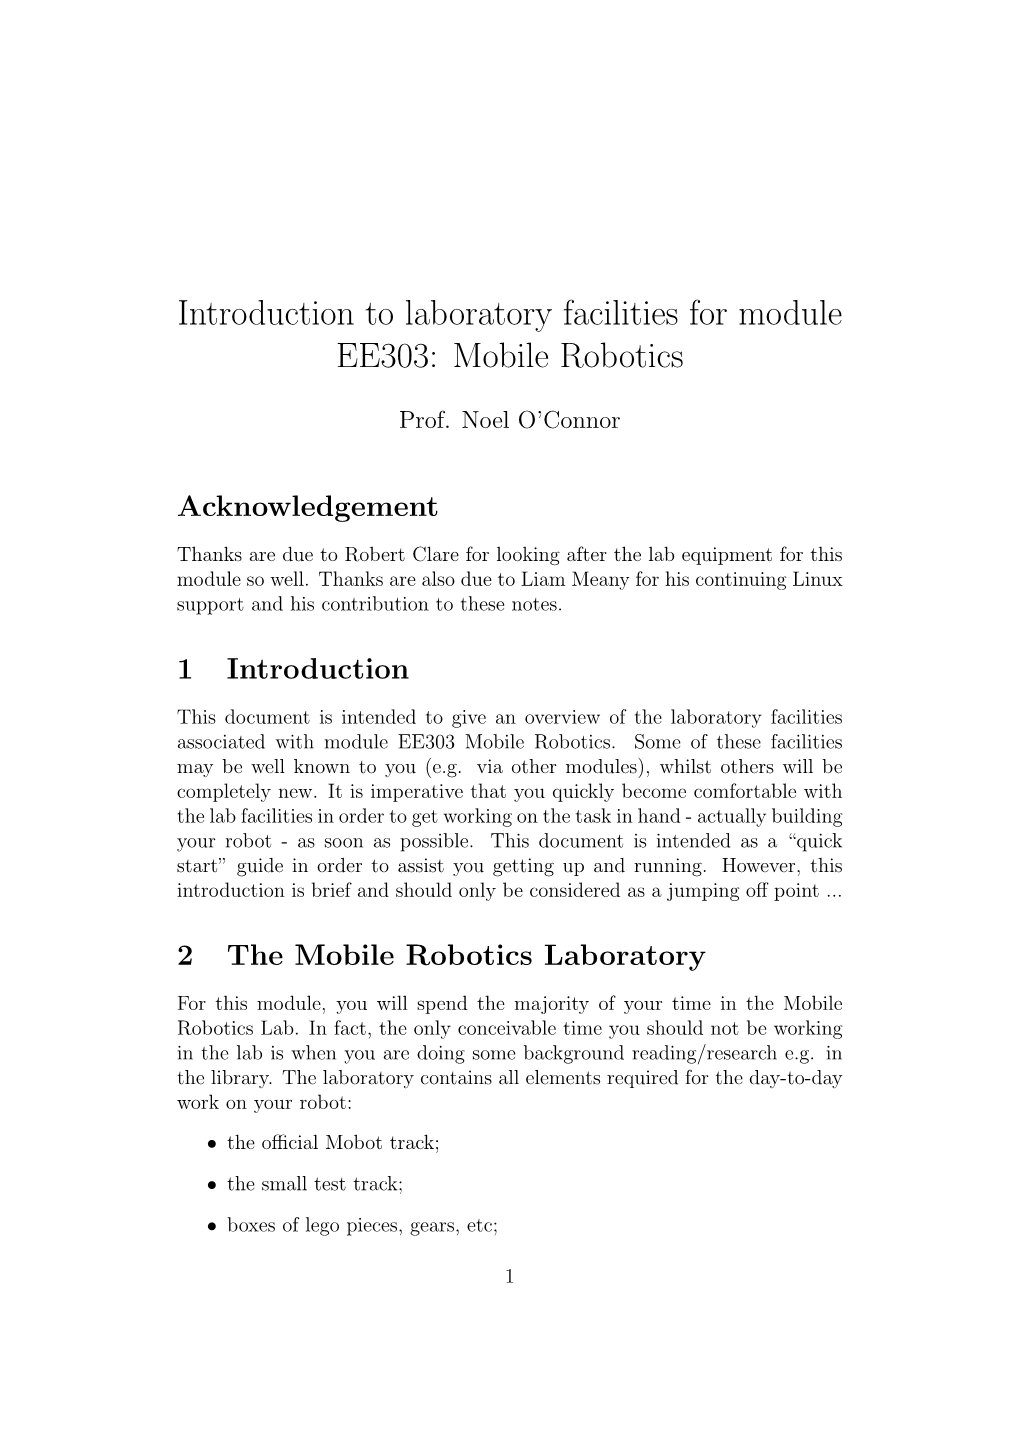 Introduction to Laboratory Facilities for Module EE303: Mobile Robotics